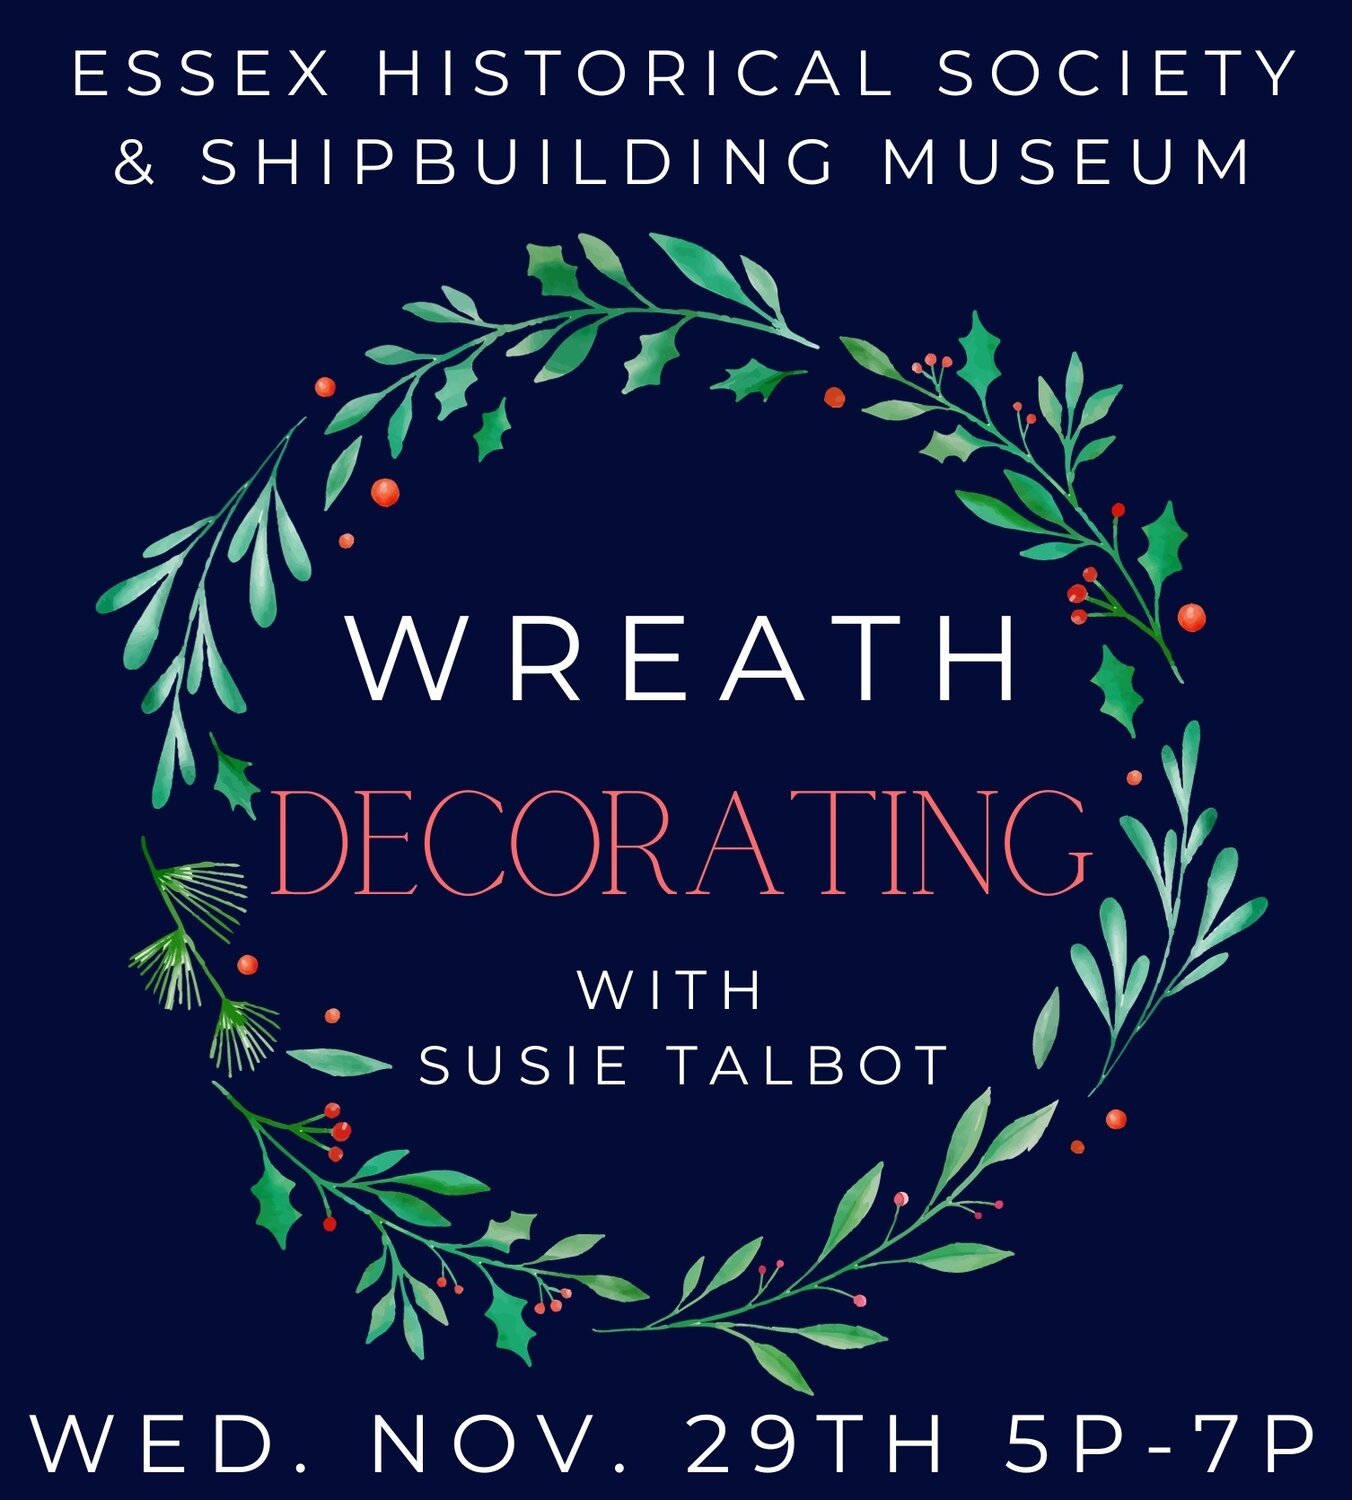 Wednesday, November 29 (5-7 p.m.) at the Essex Shipbuilding Museum, it’s "Wreath Decorating with Susie Talbot."